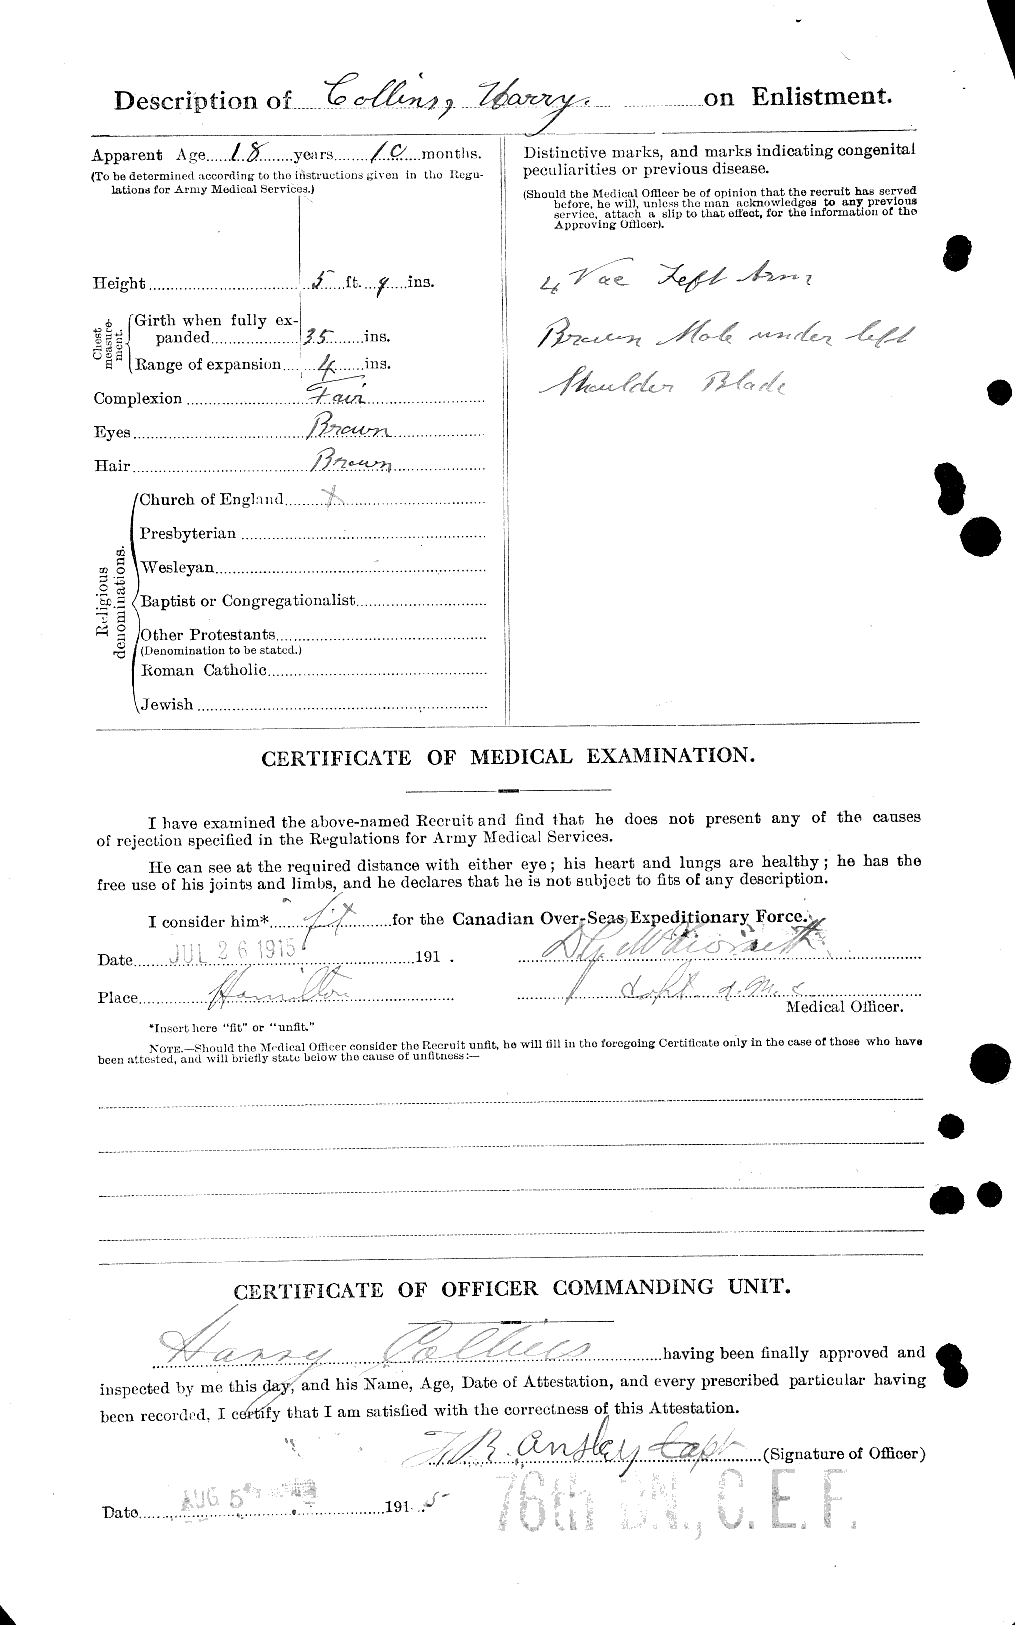 Personnel Records of the First World War - CEF 042260b